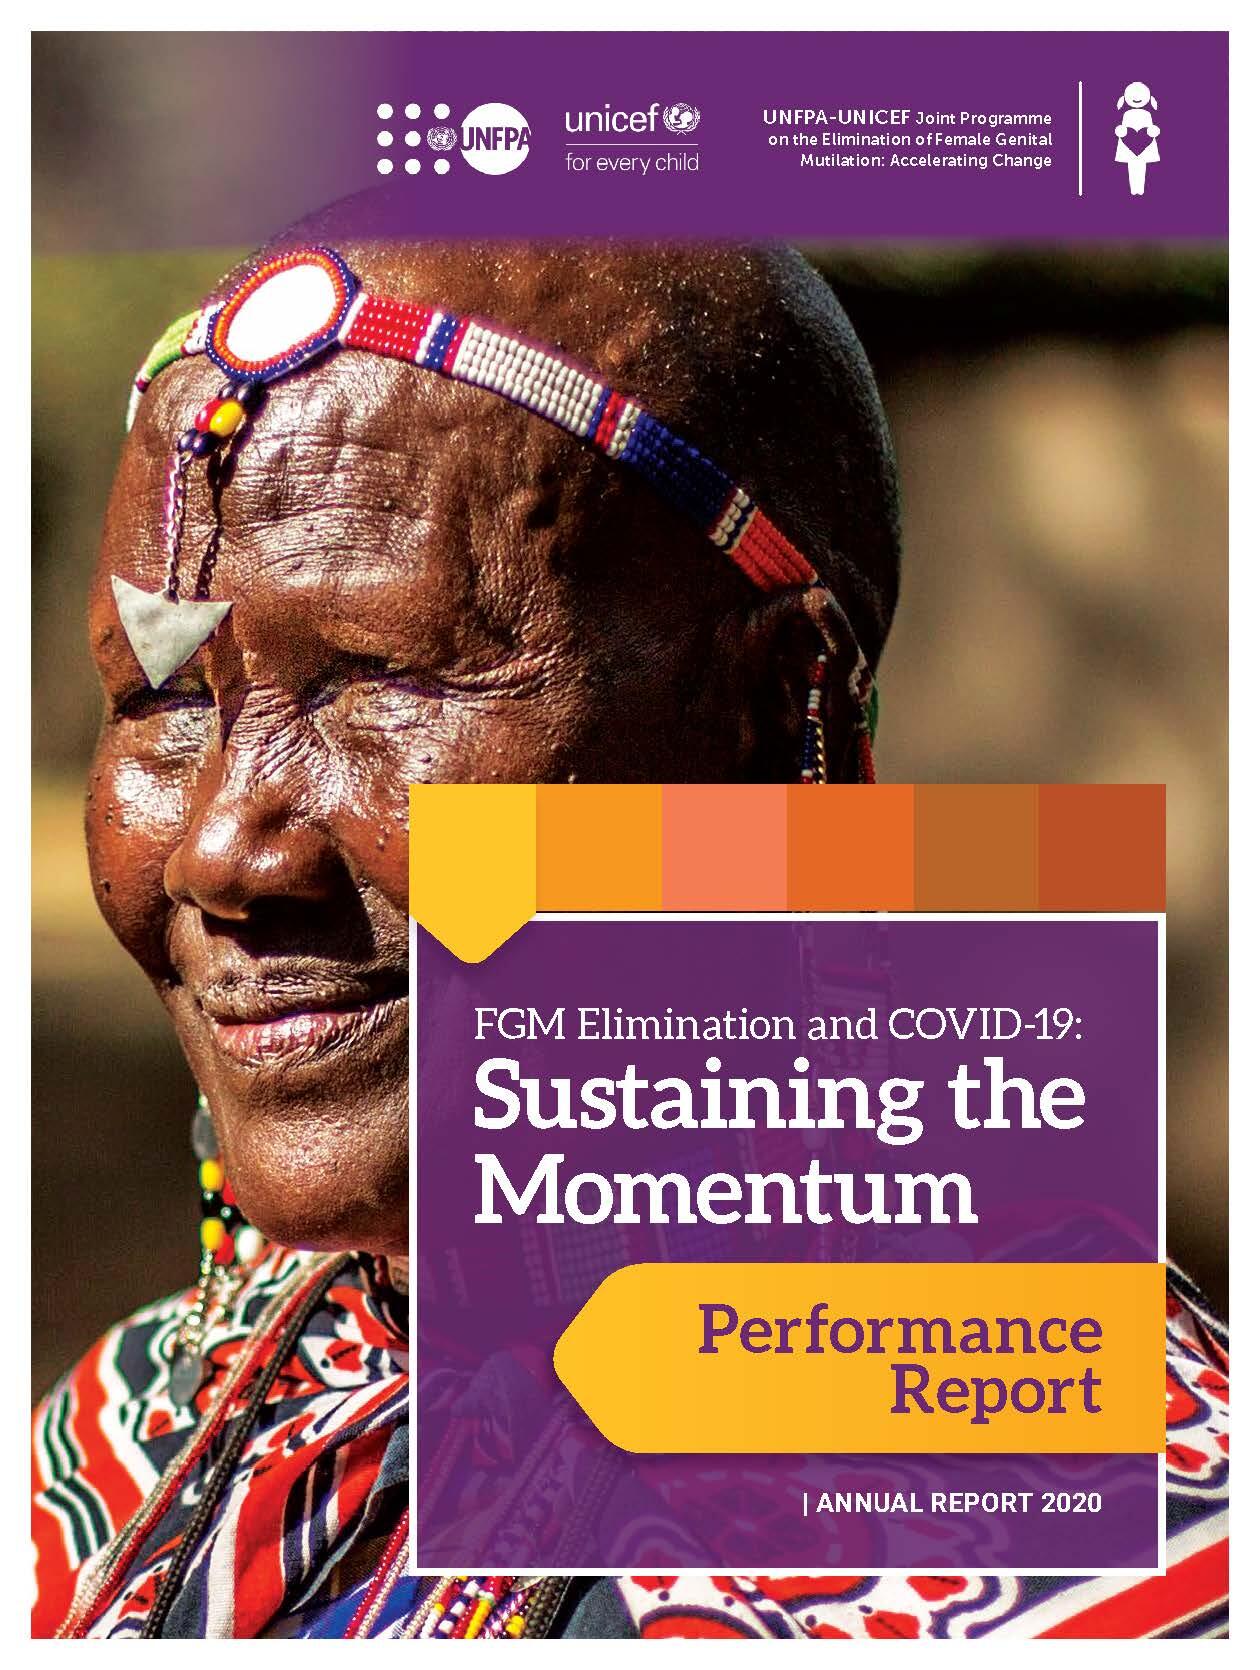 Woman smiling FGM report 2020 cover